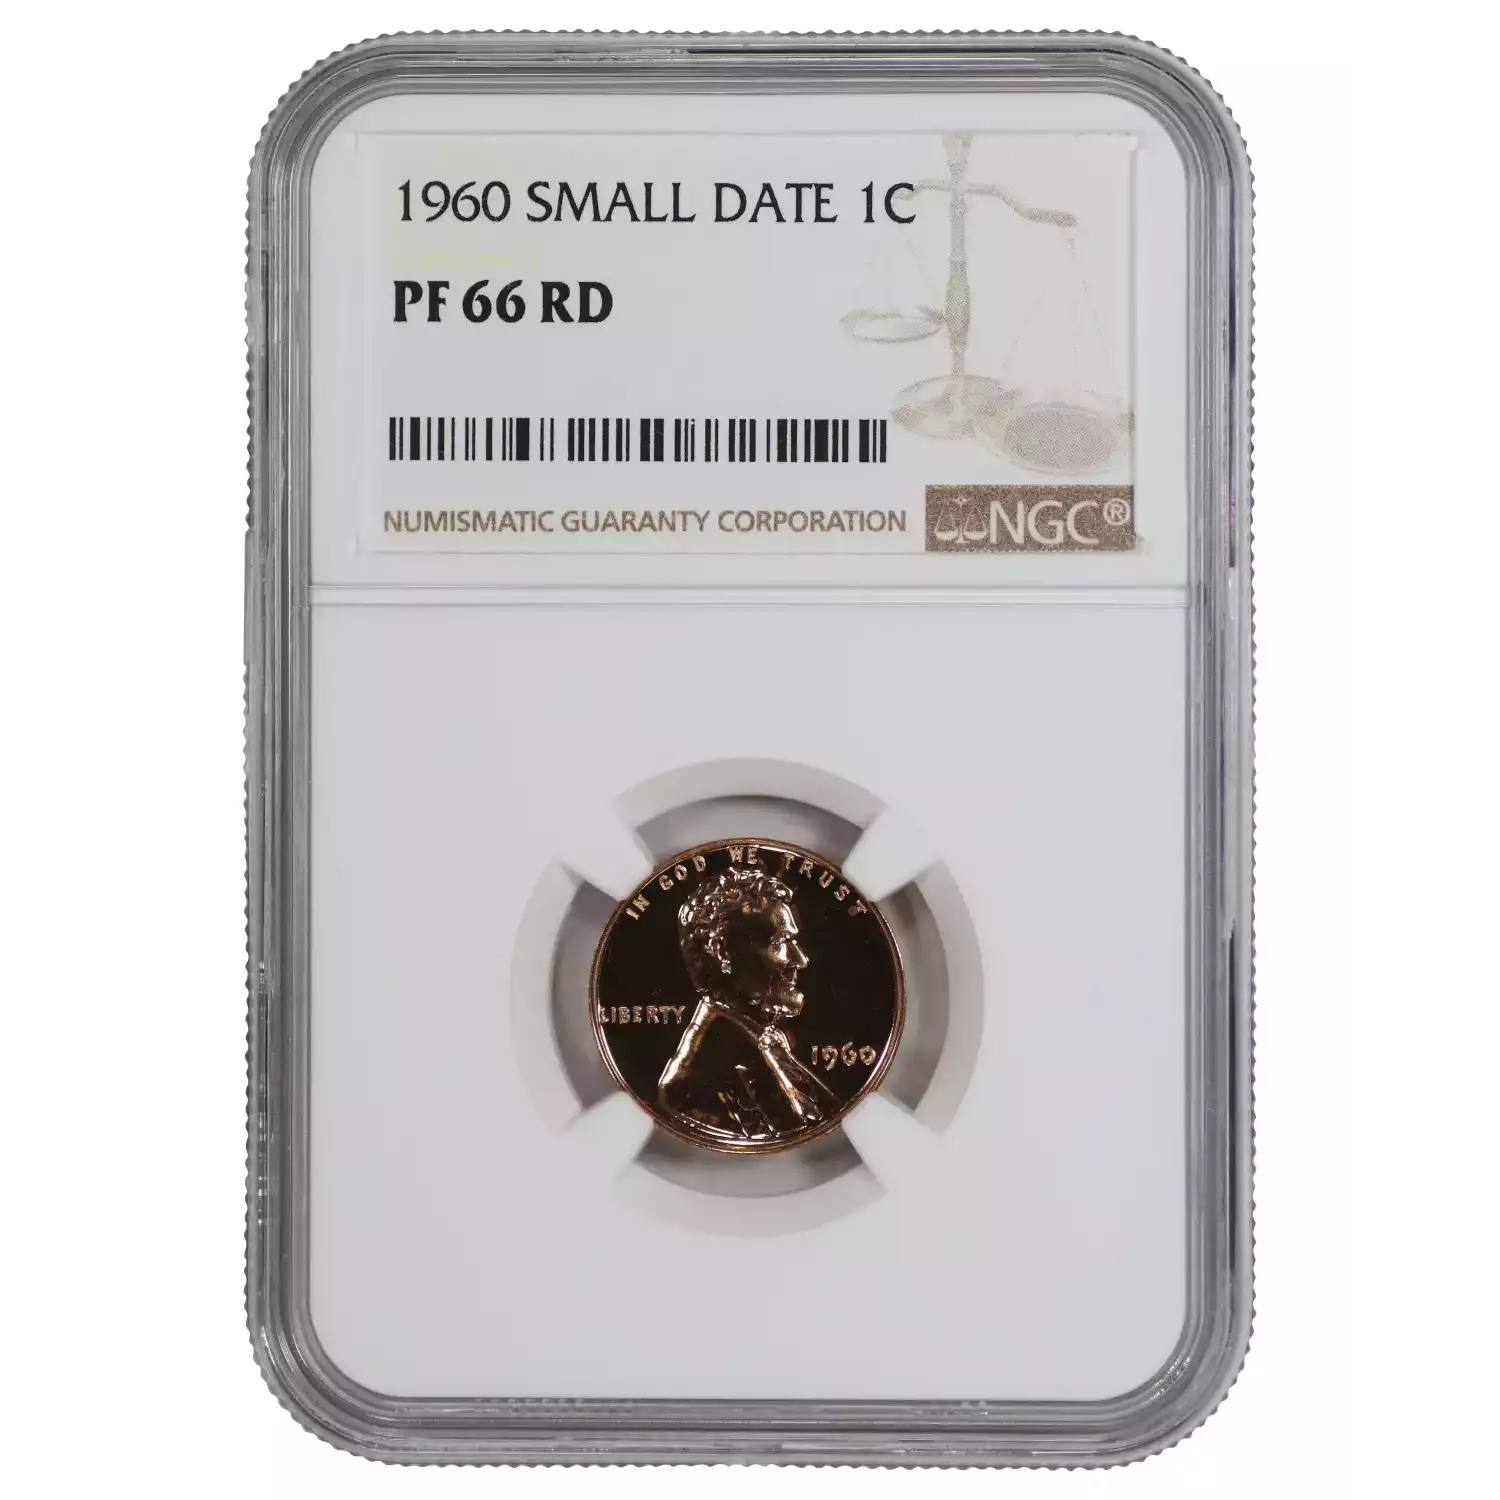 1960 SMALL DATE PROOF LINCOLN MEMORIAL CENT PENNY 1C NGC CERTIFIED PF 66 RD